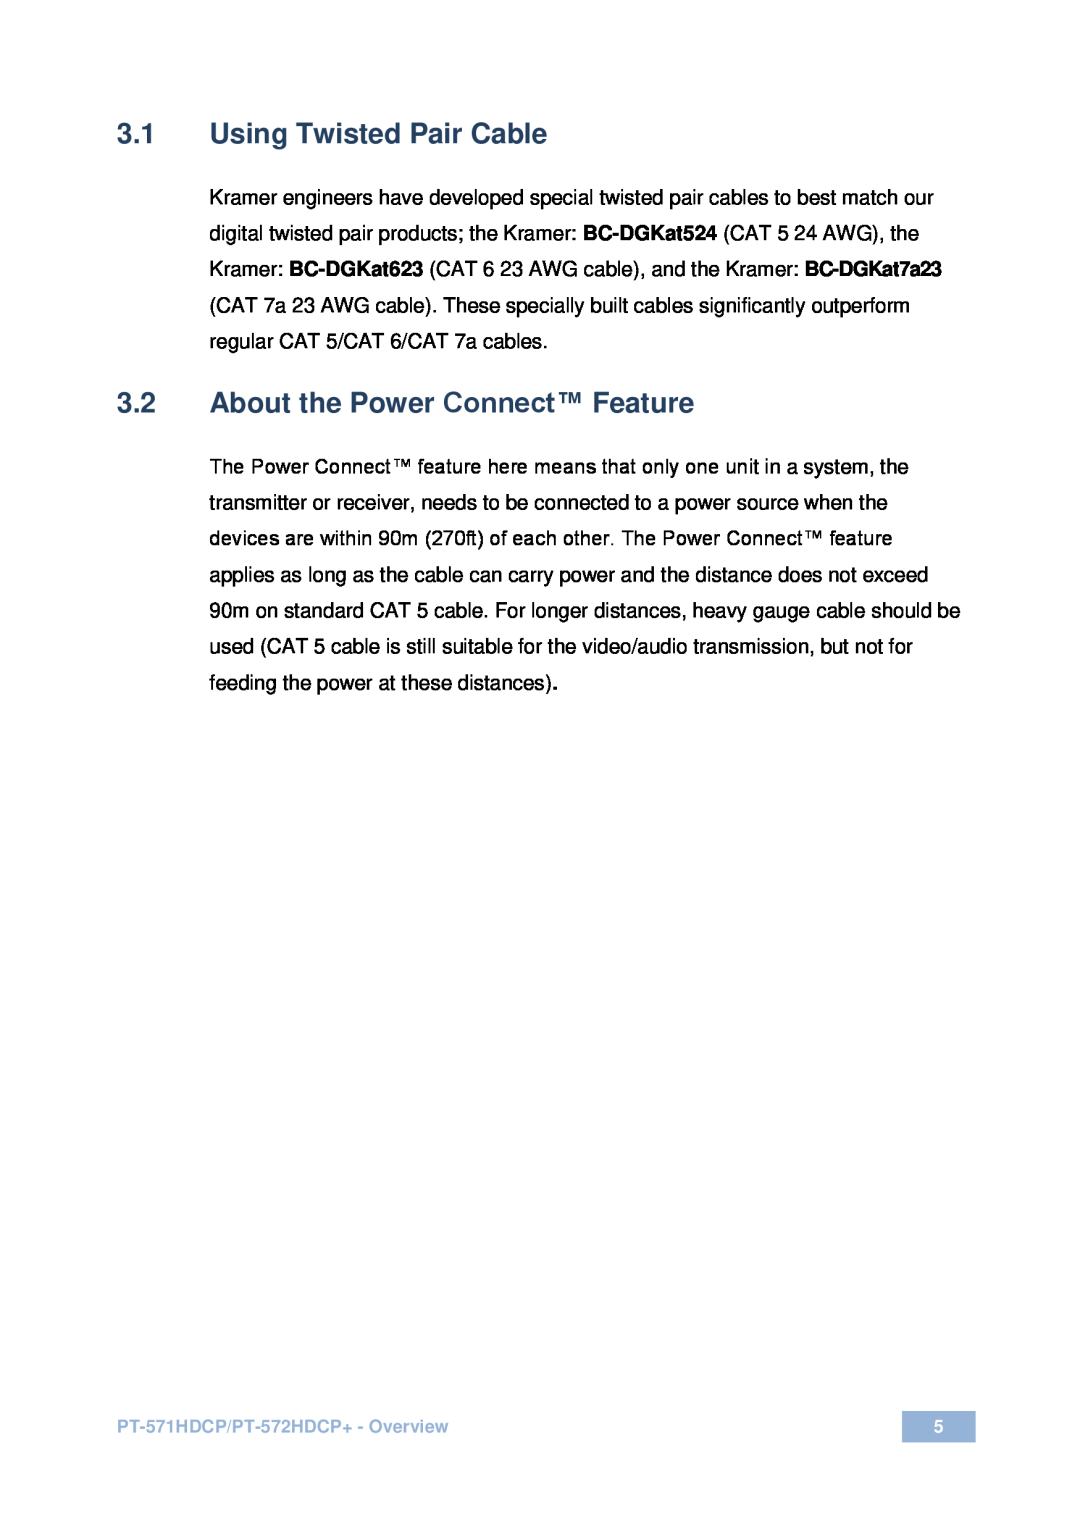 Kramer Electronics PT571HDCP user manual 3.1Using Twisted Pair Cable, 3.2About the Power Connect Feature 